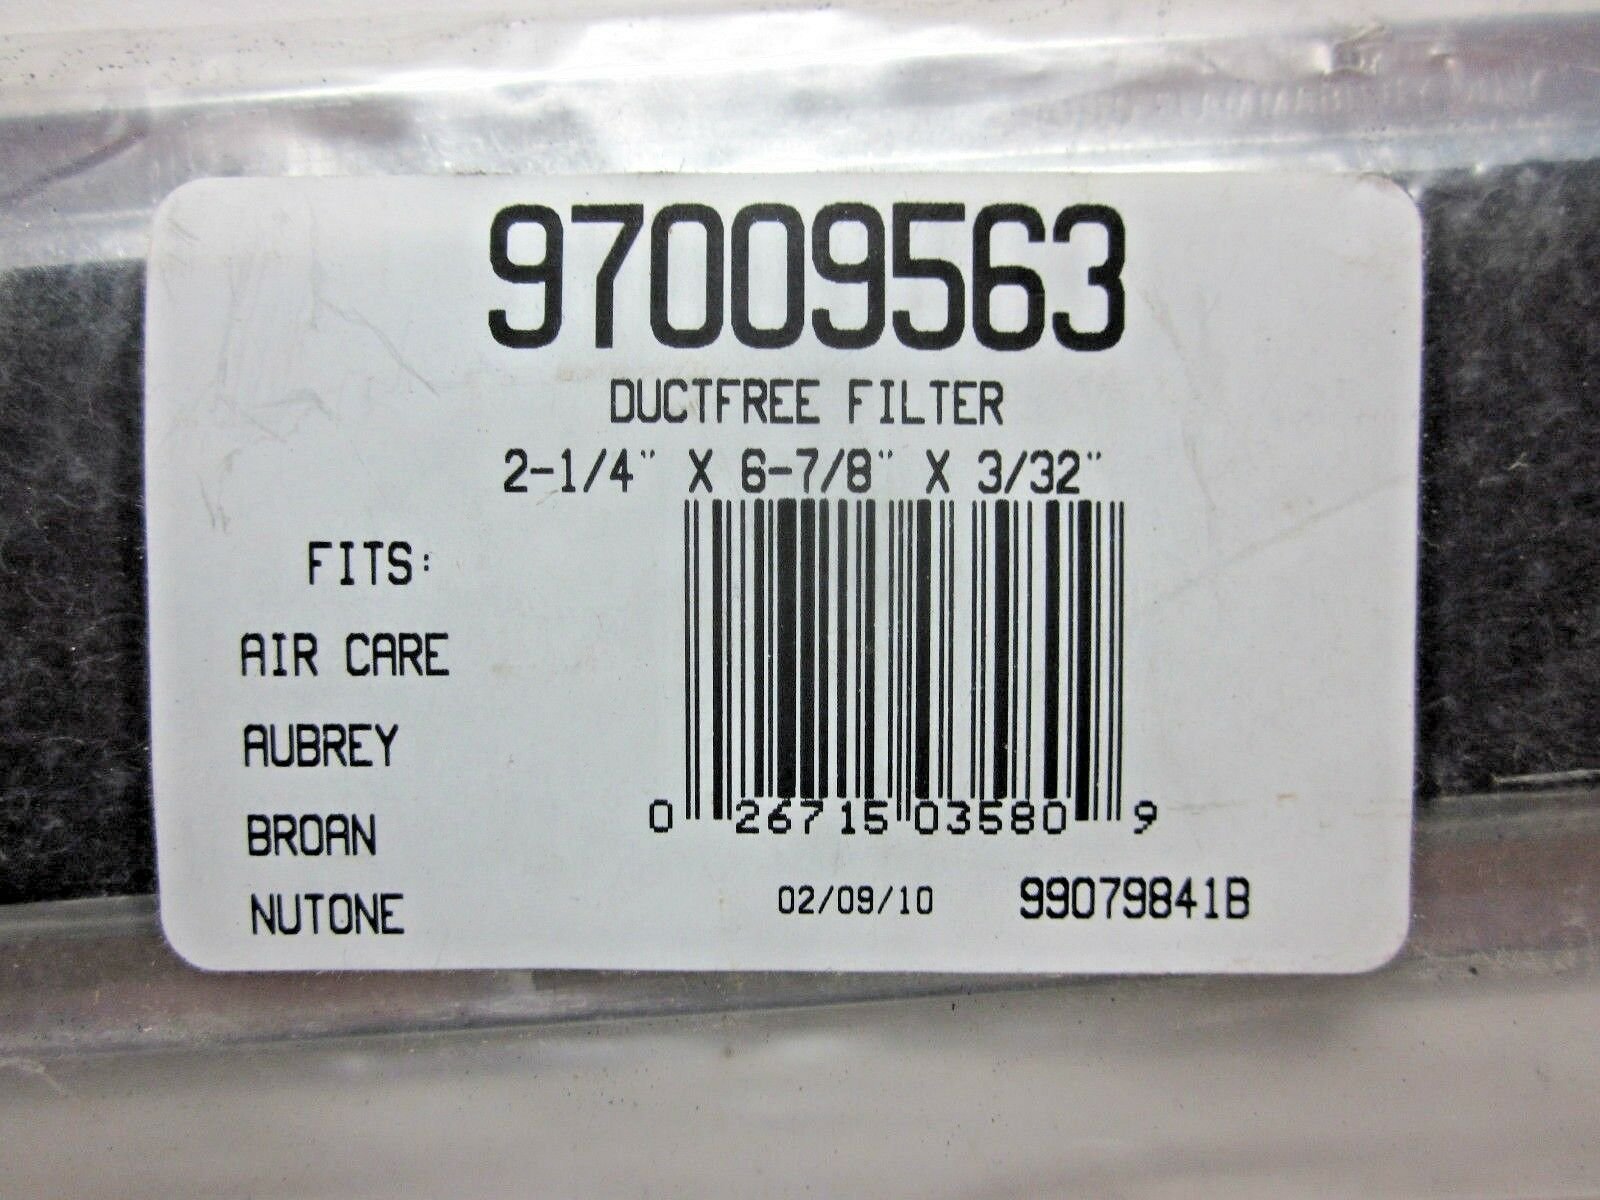 Duct Free Replacement Fan Filter 97009563 682 Air Care Aubrey Broan Nutone 1 Ea in dimensions 1600 X 1200